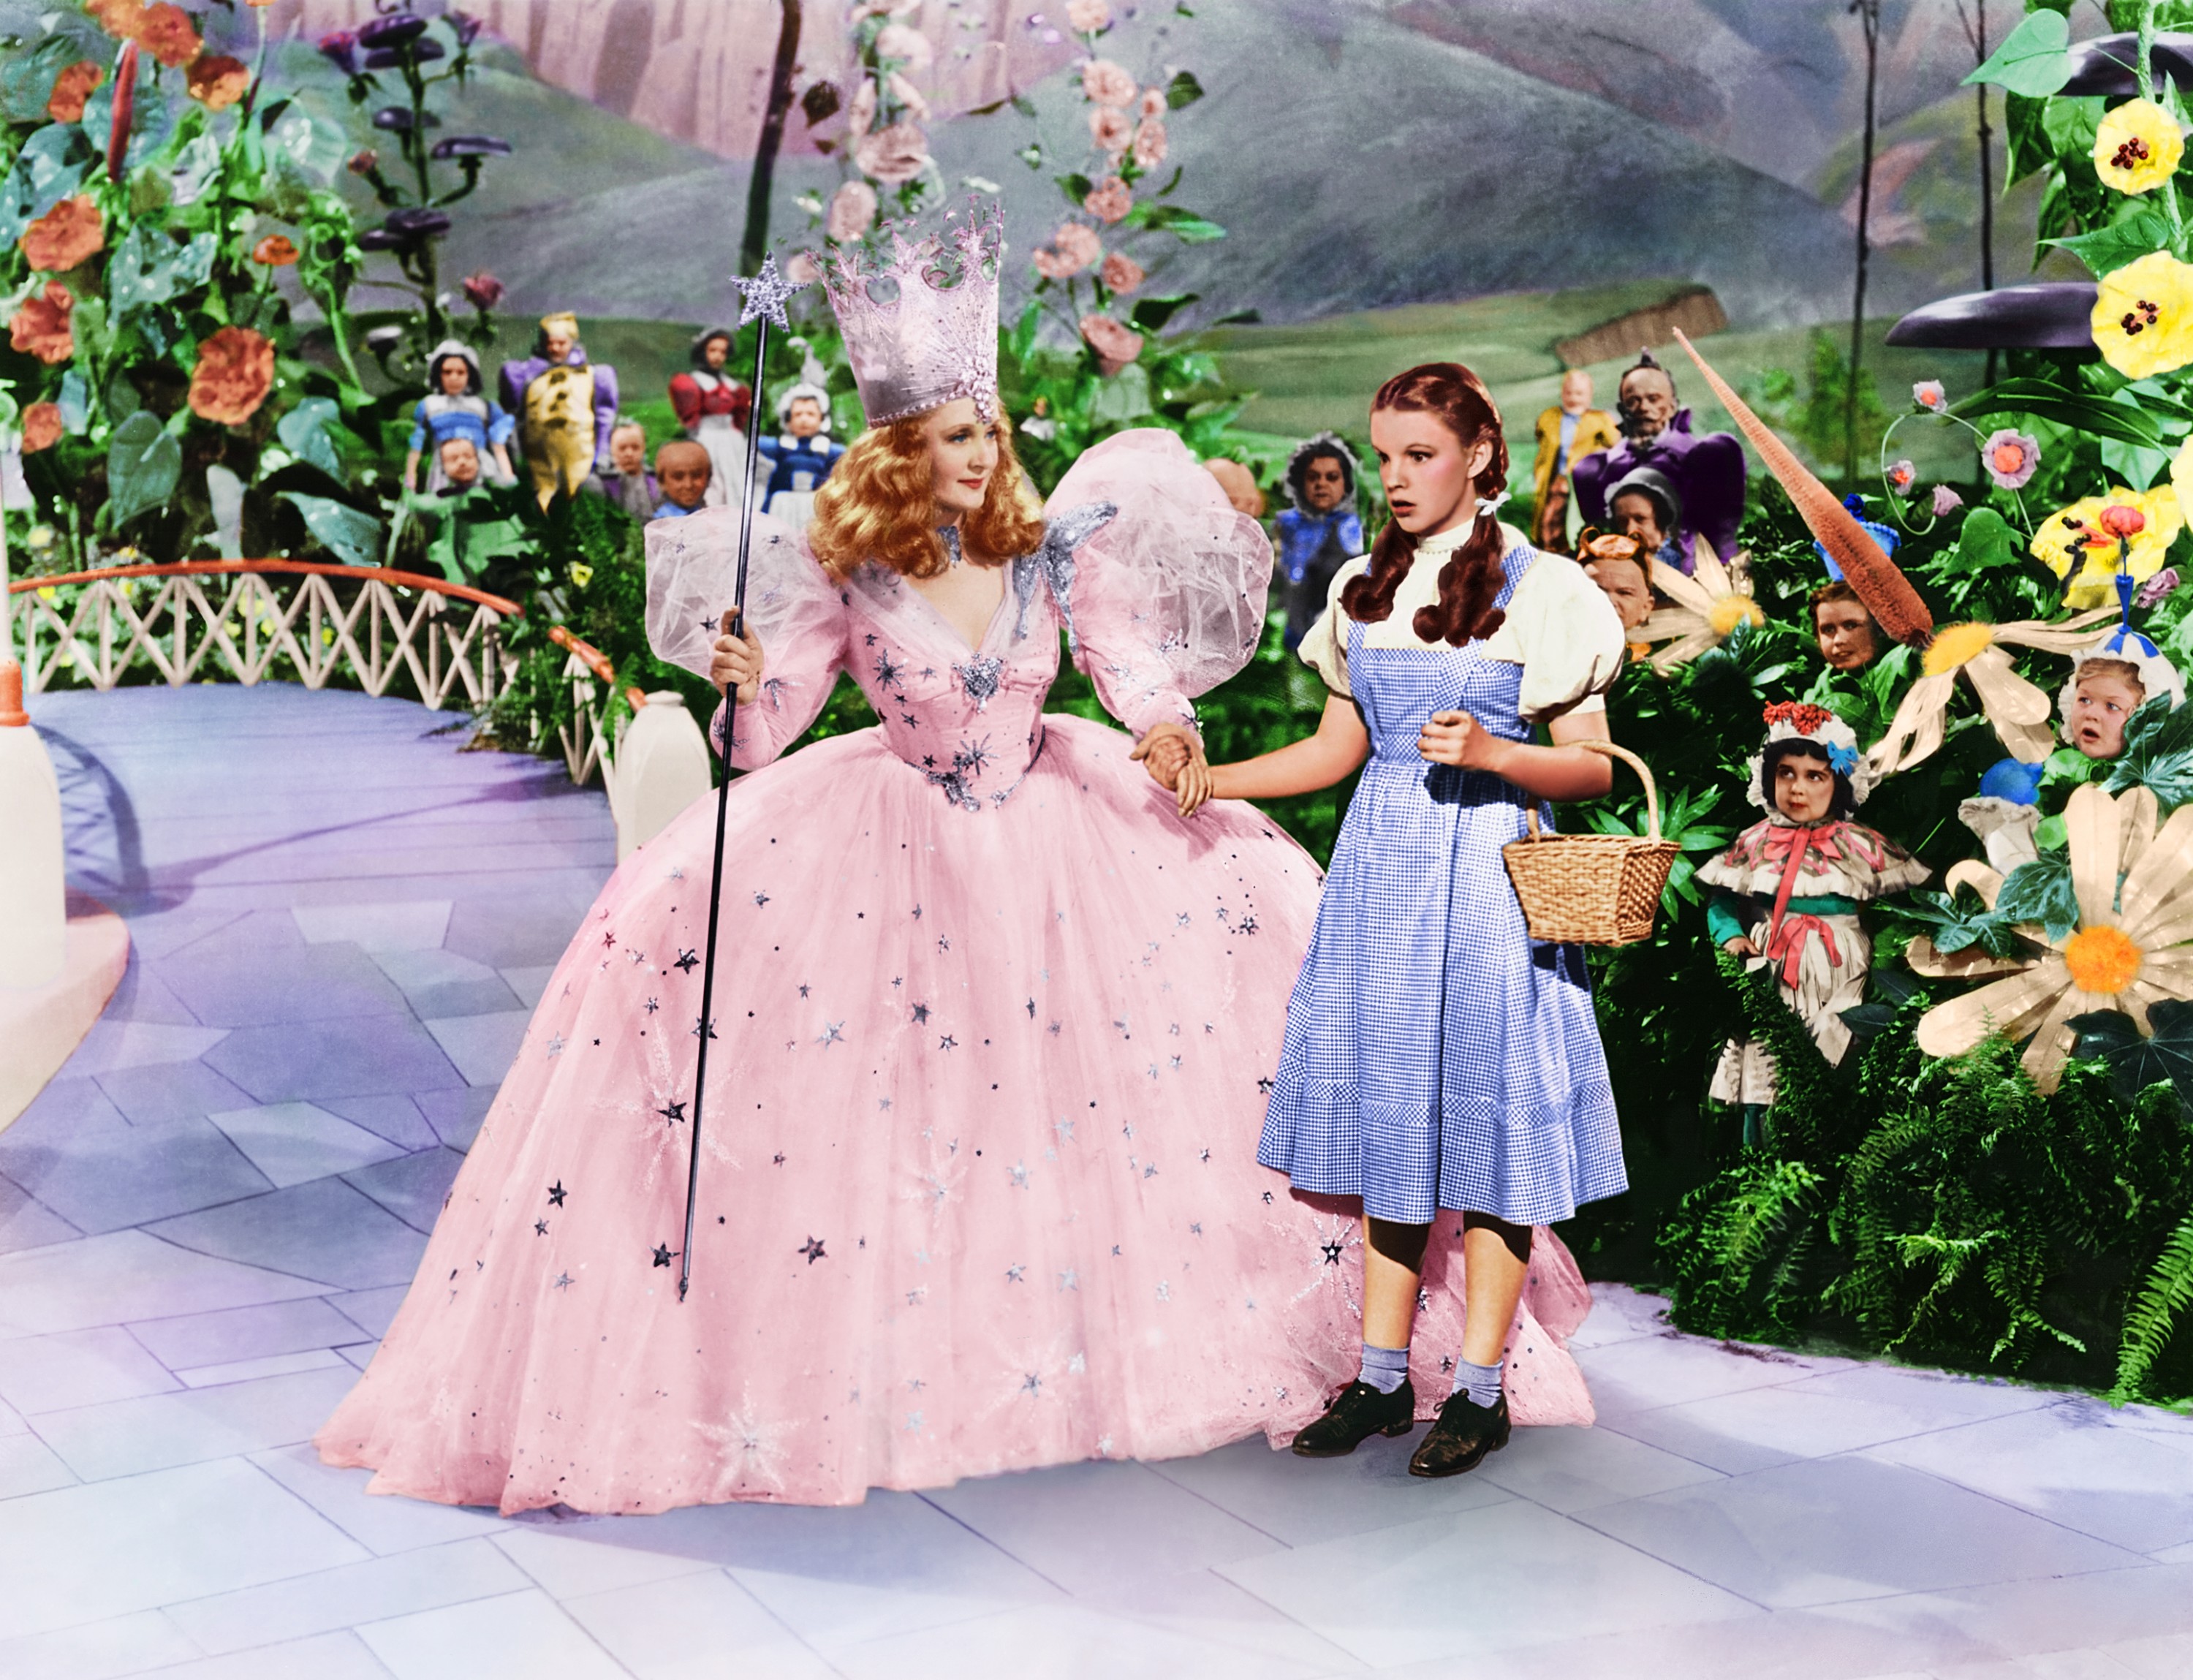 WHAT: The Wizard of Oz. 